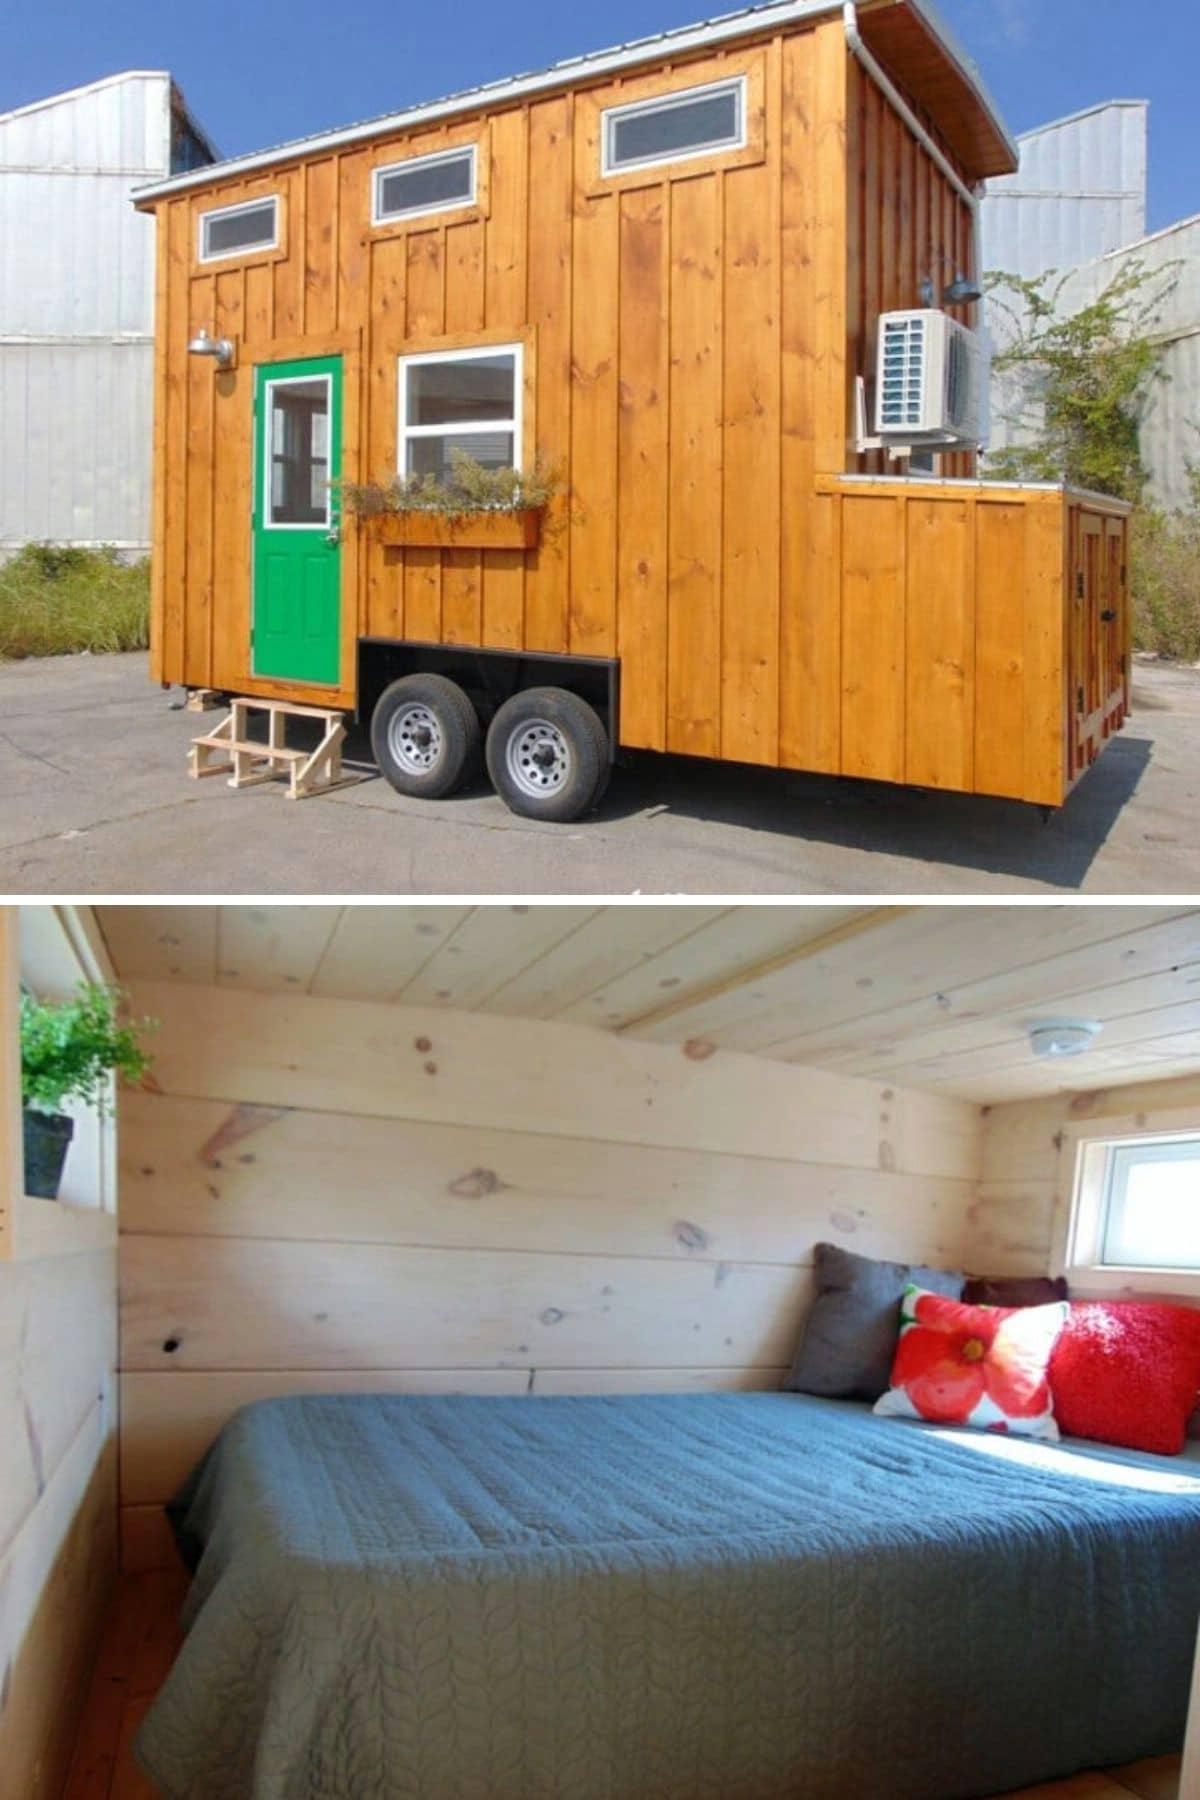 Comfortable Living in Just 128 Square Feet